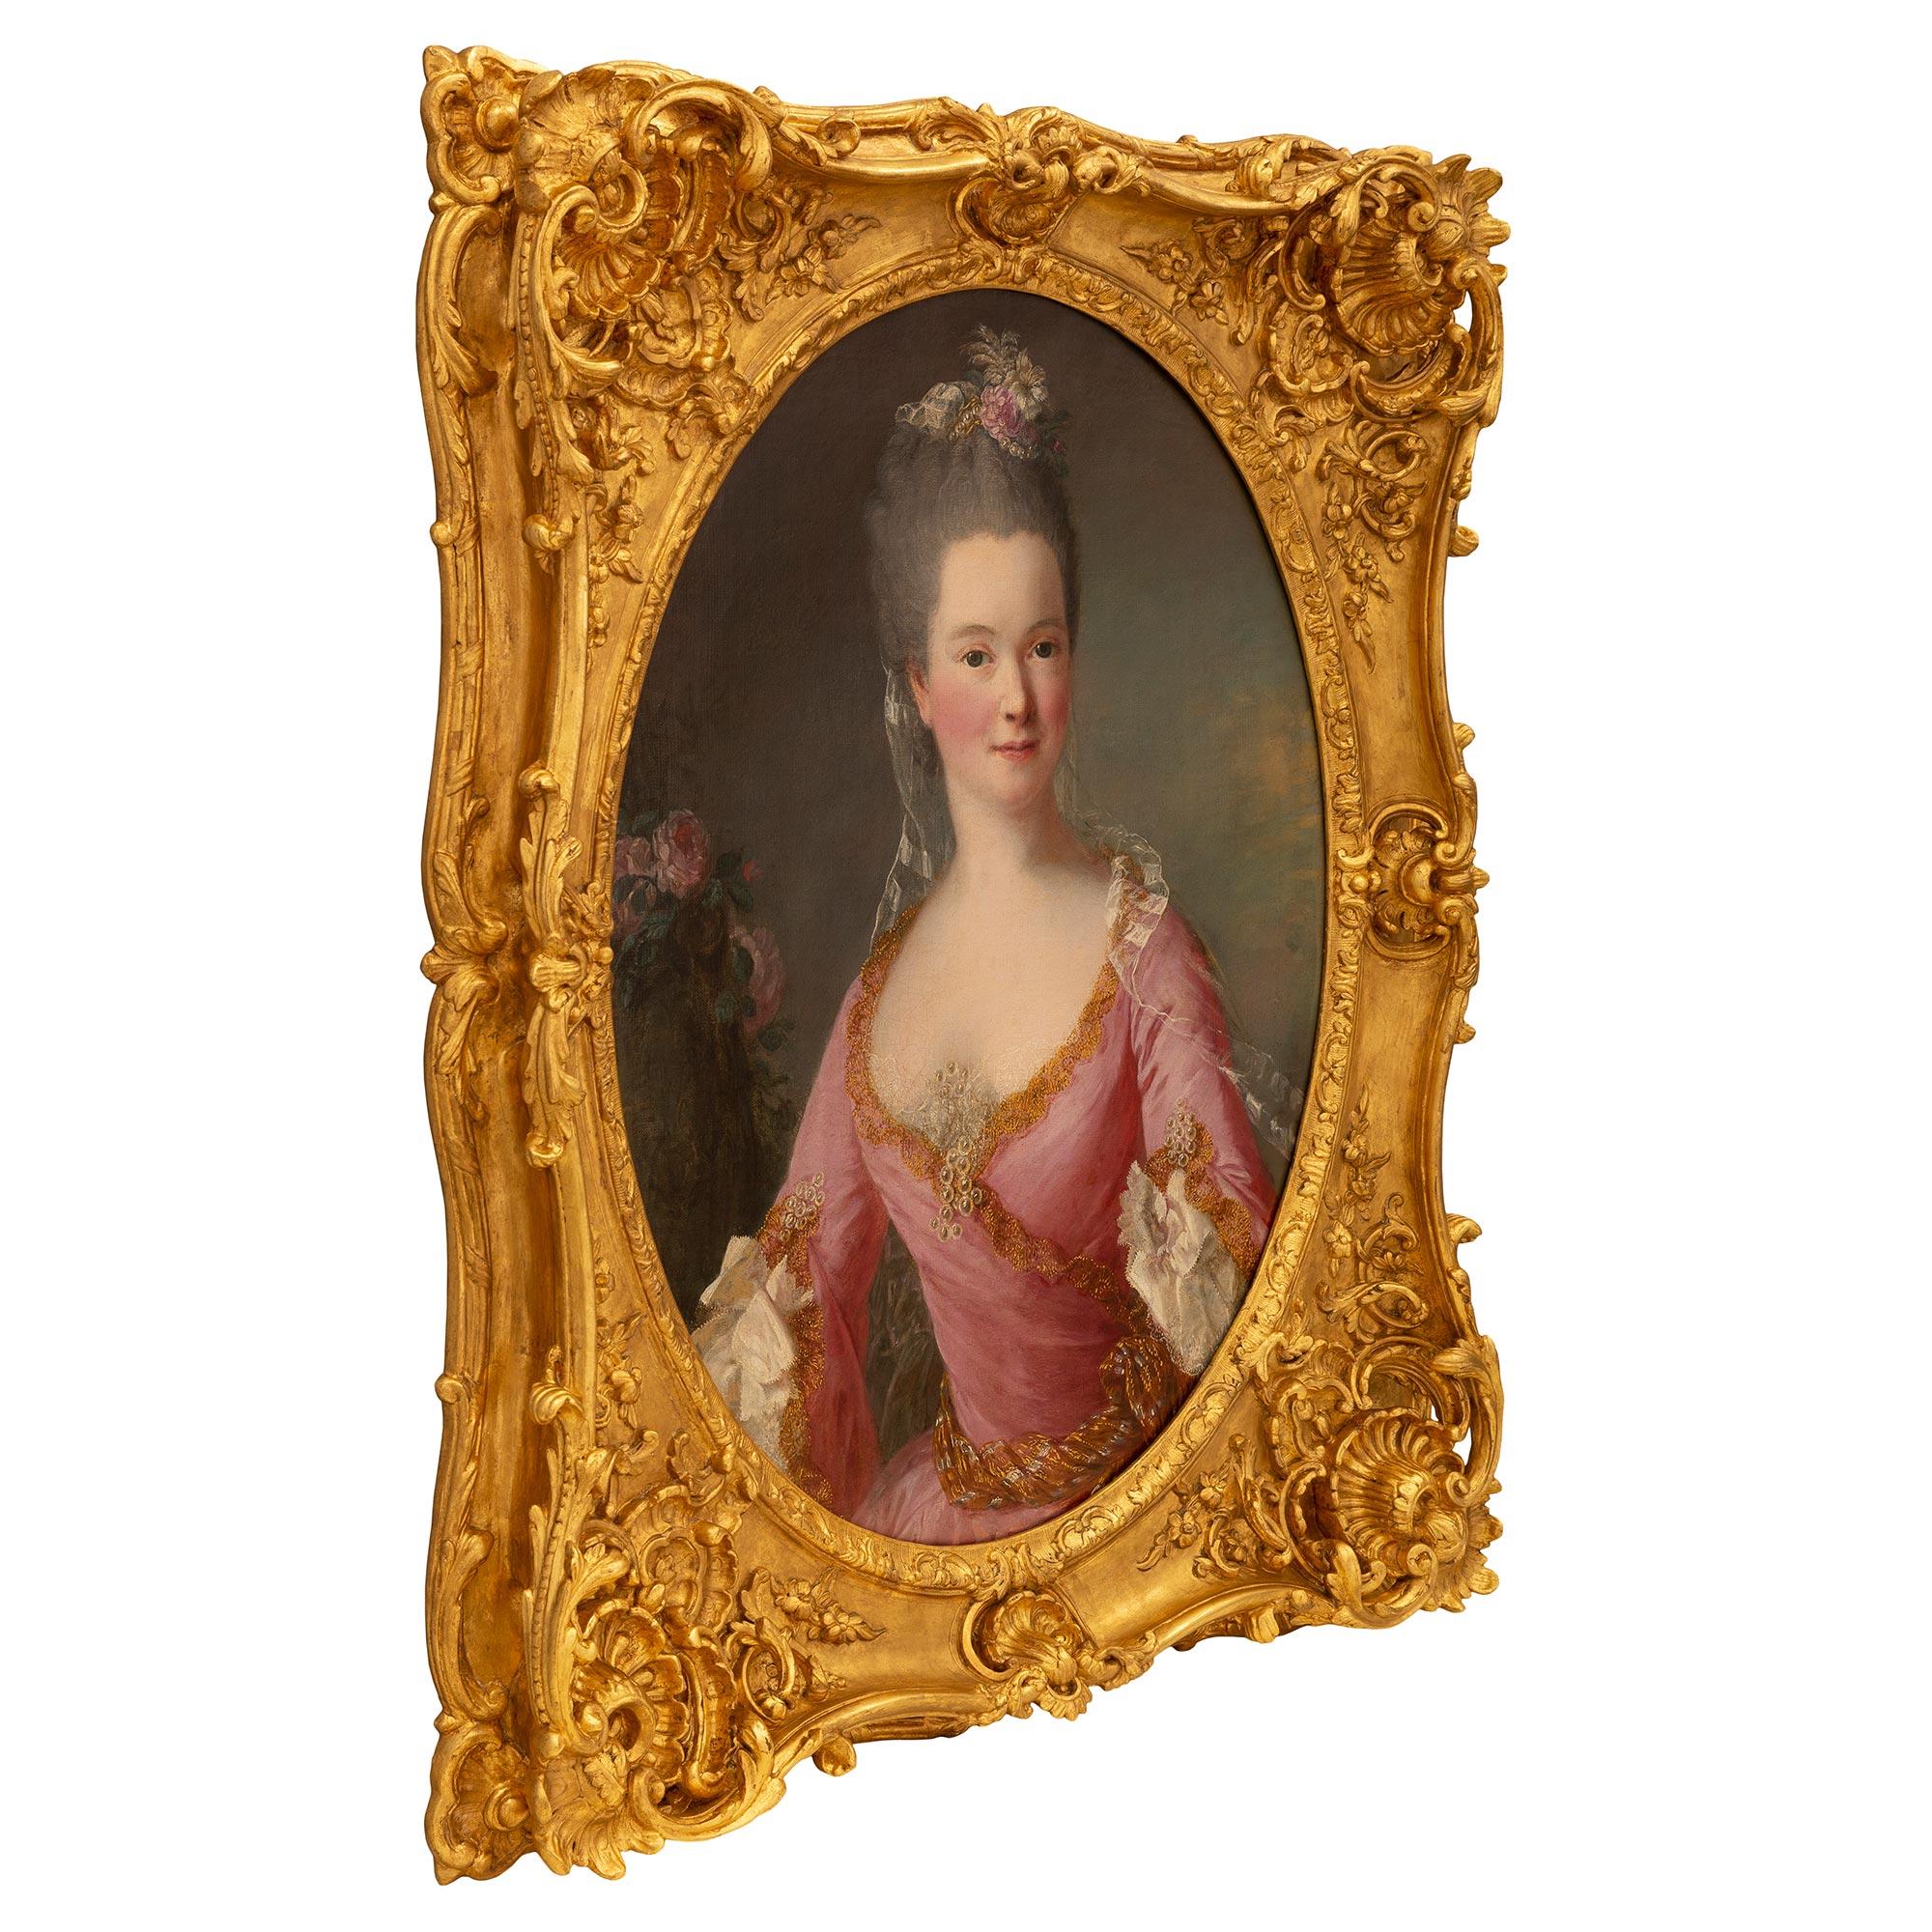 A stunning and extremely high quality Continental early 19th century Louis XV st. oil on canvas portrait. The painting depicts a beautiful young maiden dressed in a most elegant pink garment adorned with pearls. She wears her hair in an updo with